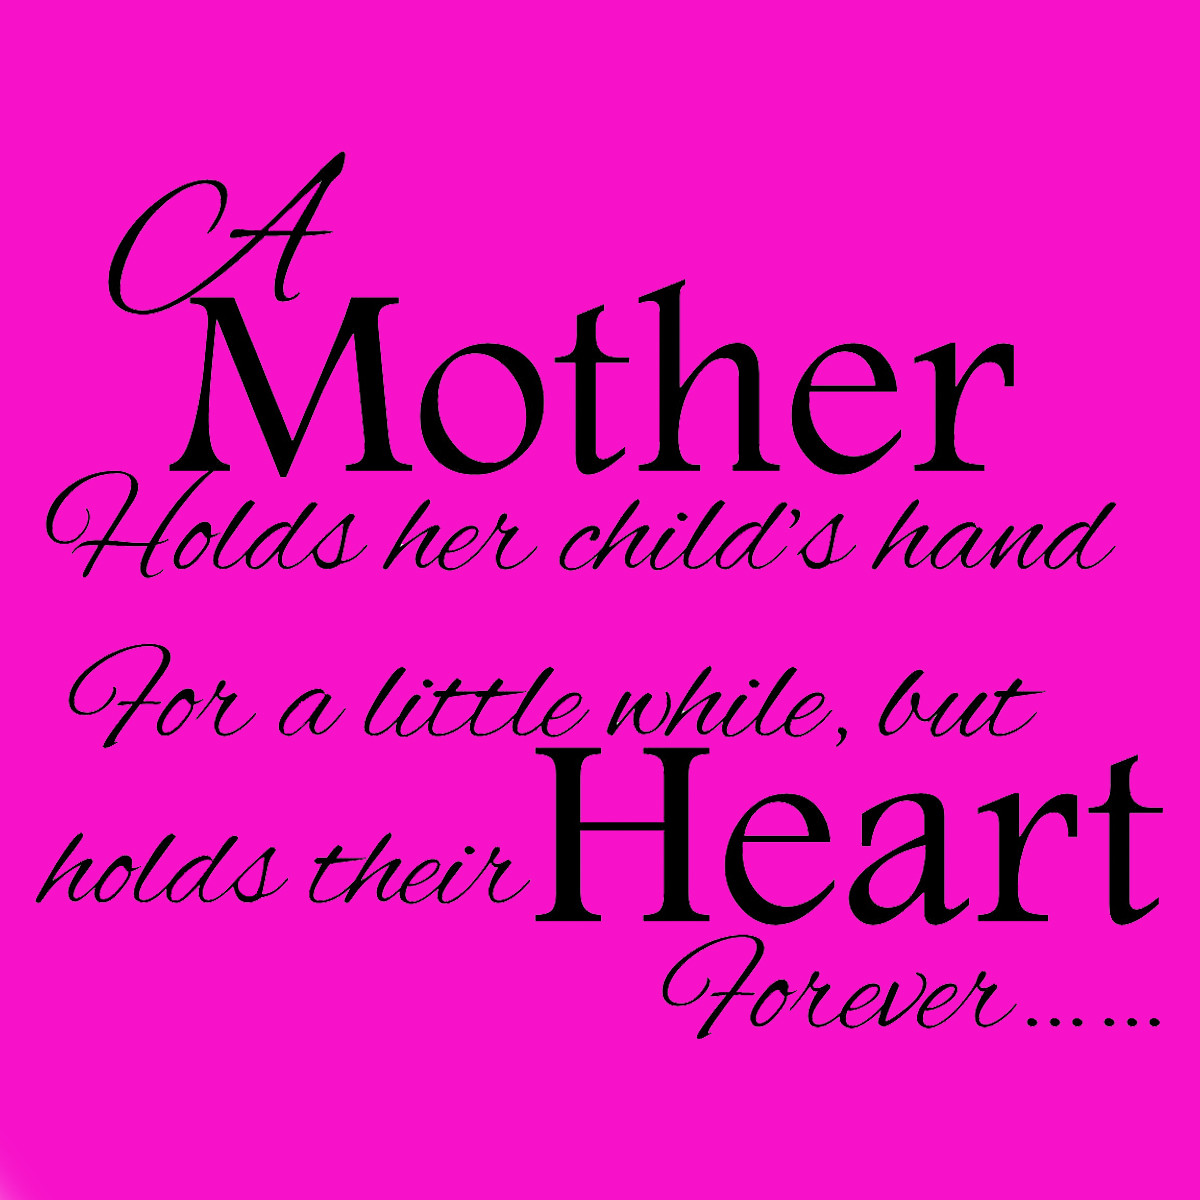 Quotes On Mother Day
 Mothers Day Quotes For QuotesGram